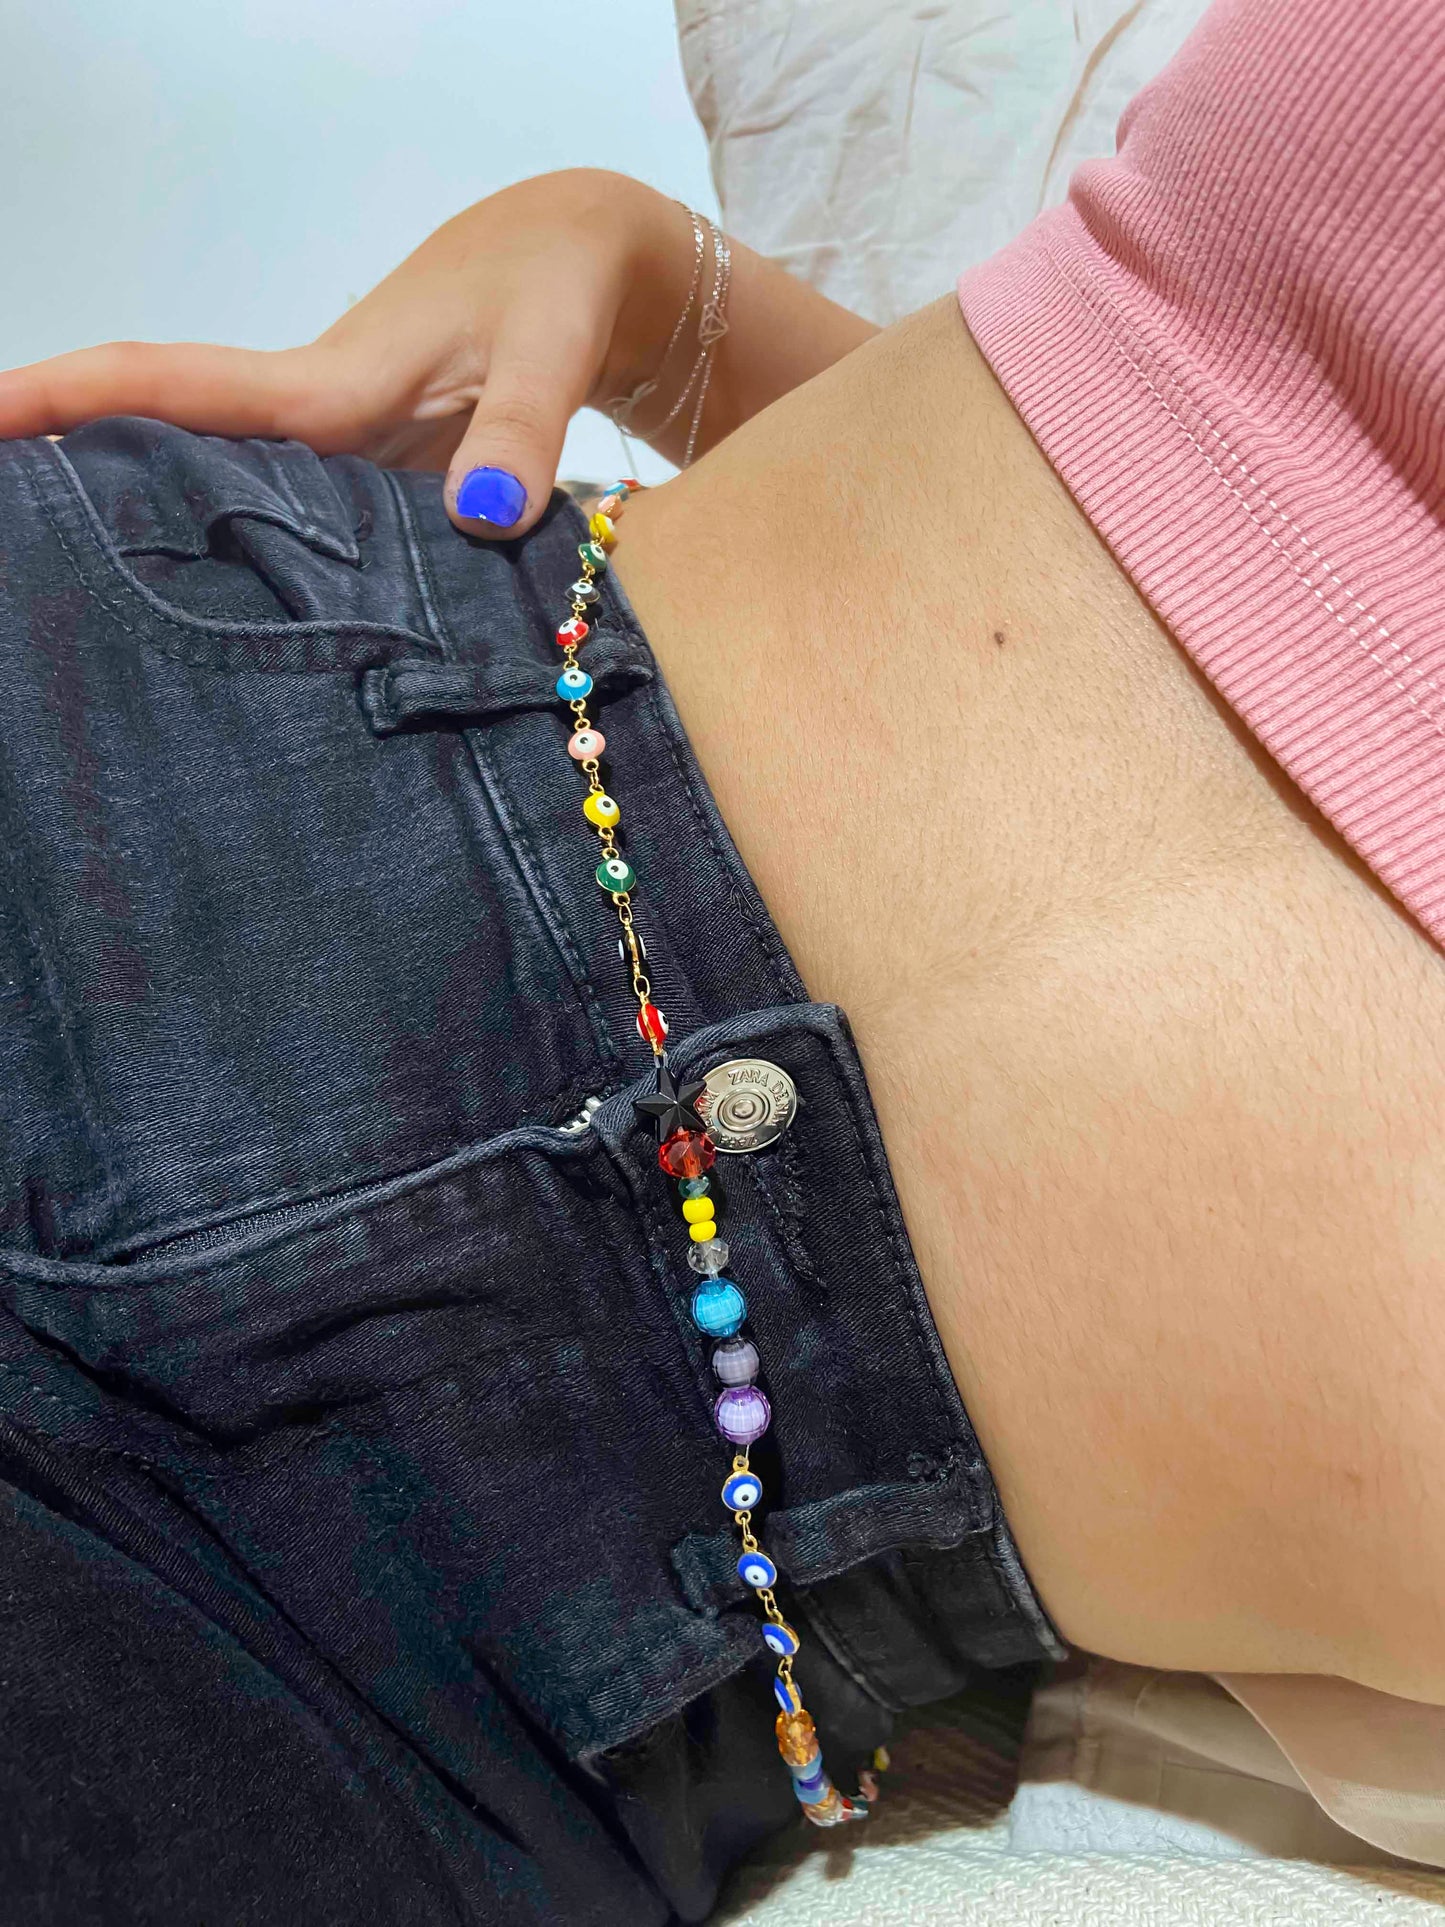 A handcrafted glass and crystal beaded belly chain with multicolor evil eye charm chains.